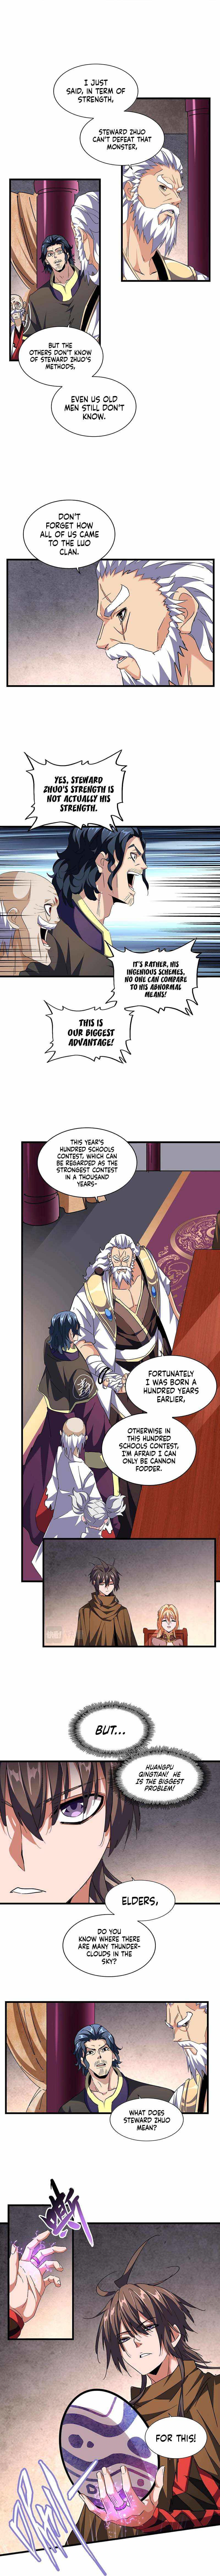 Magic Emperor Chapter 260 page 7